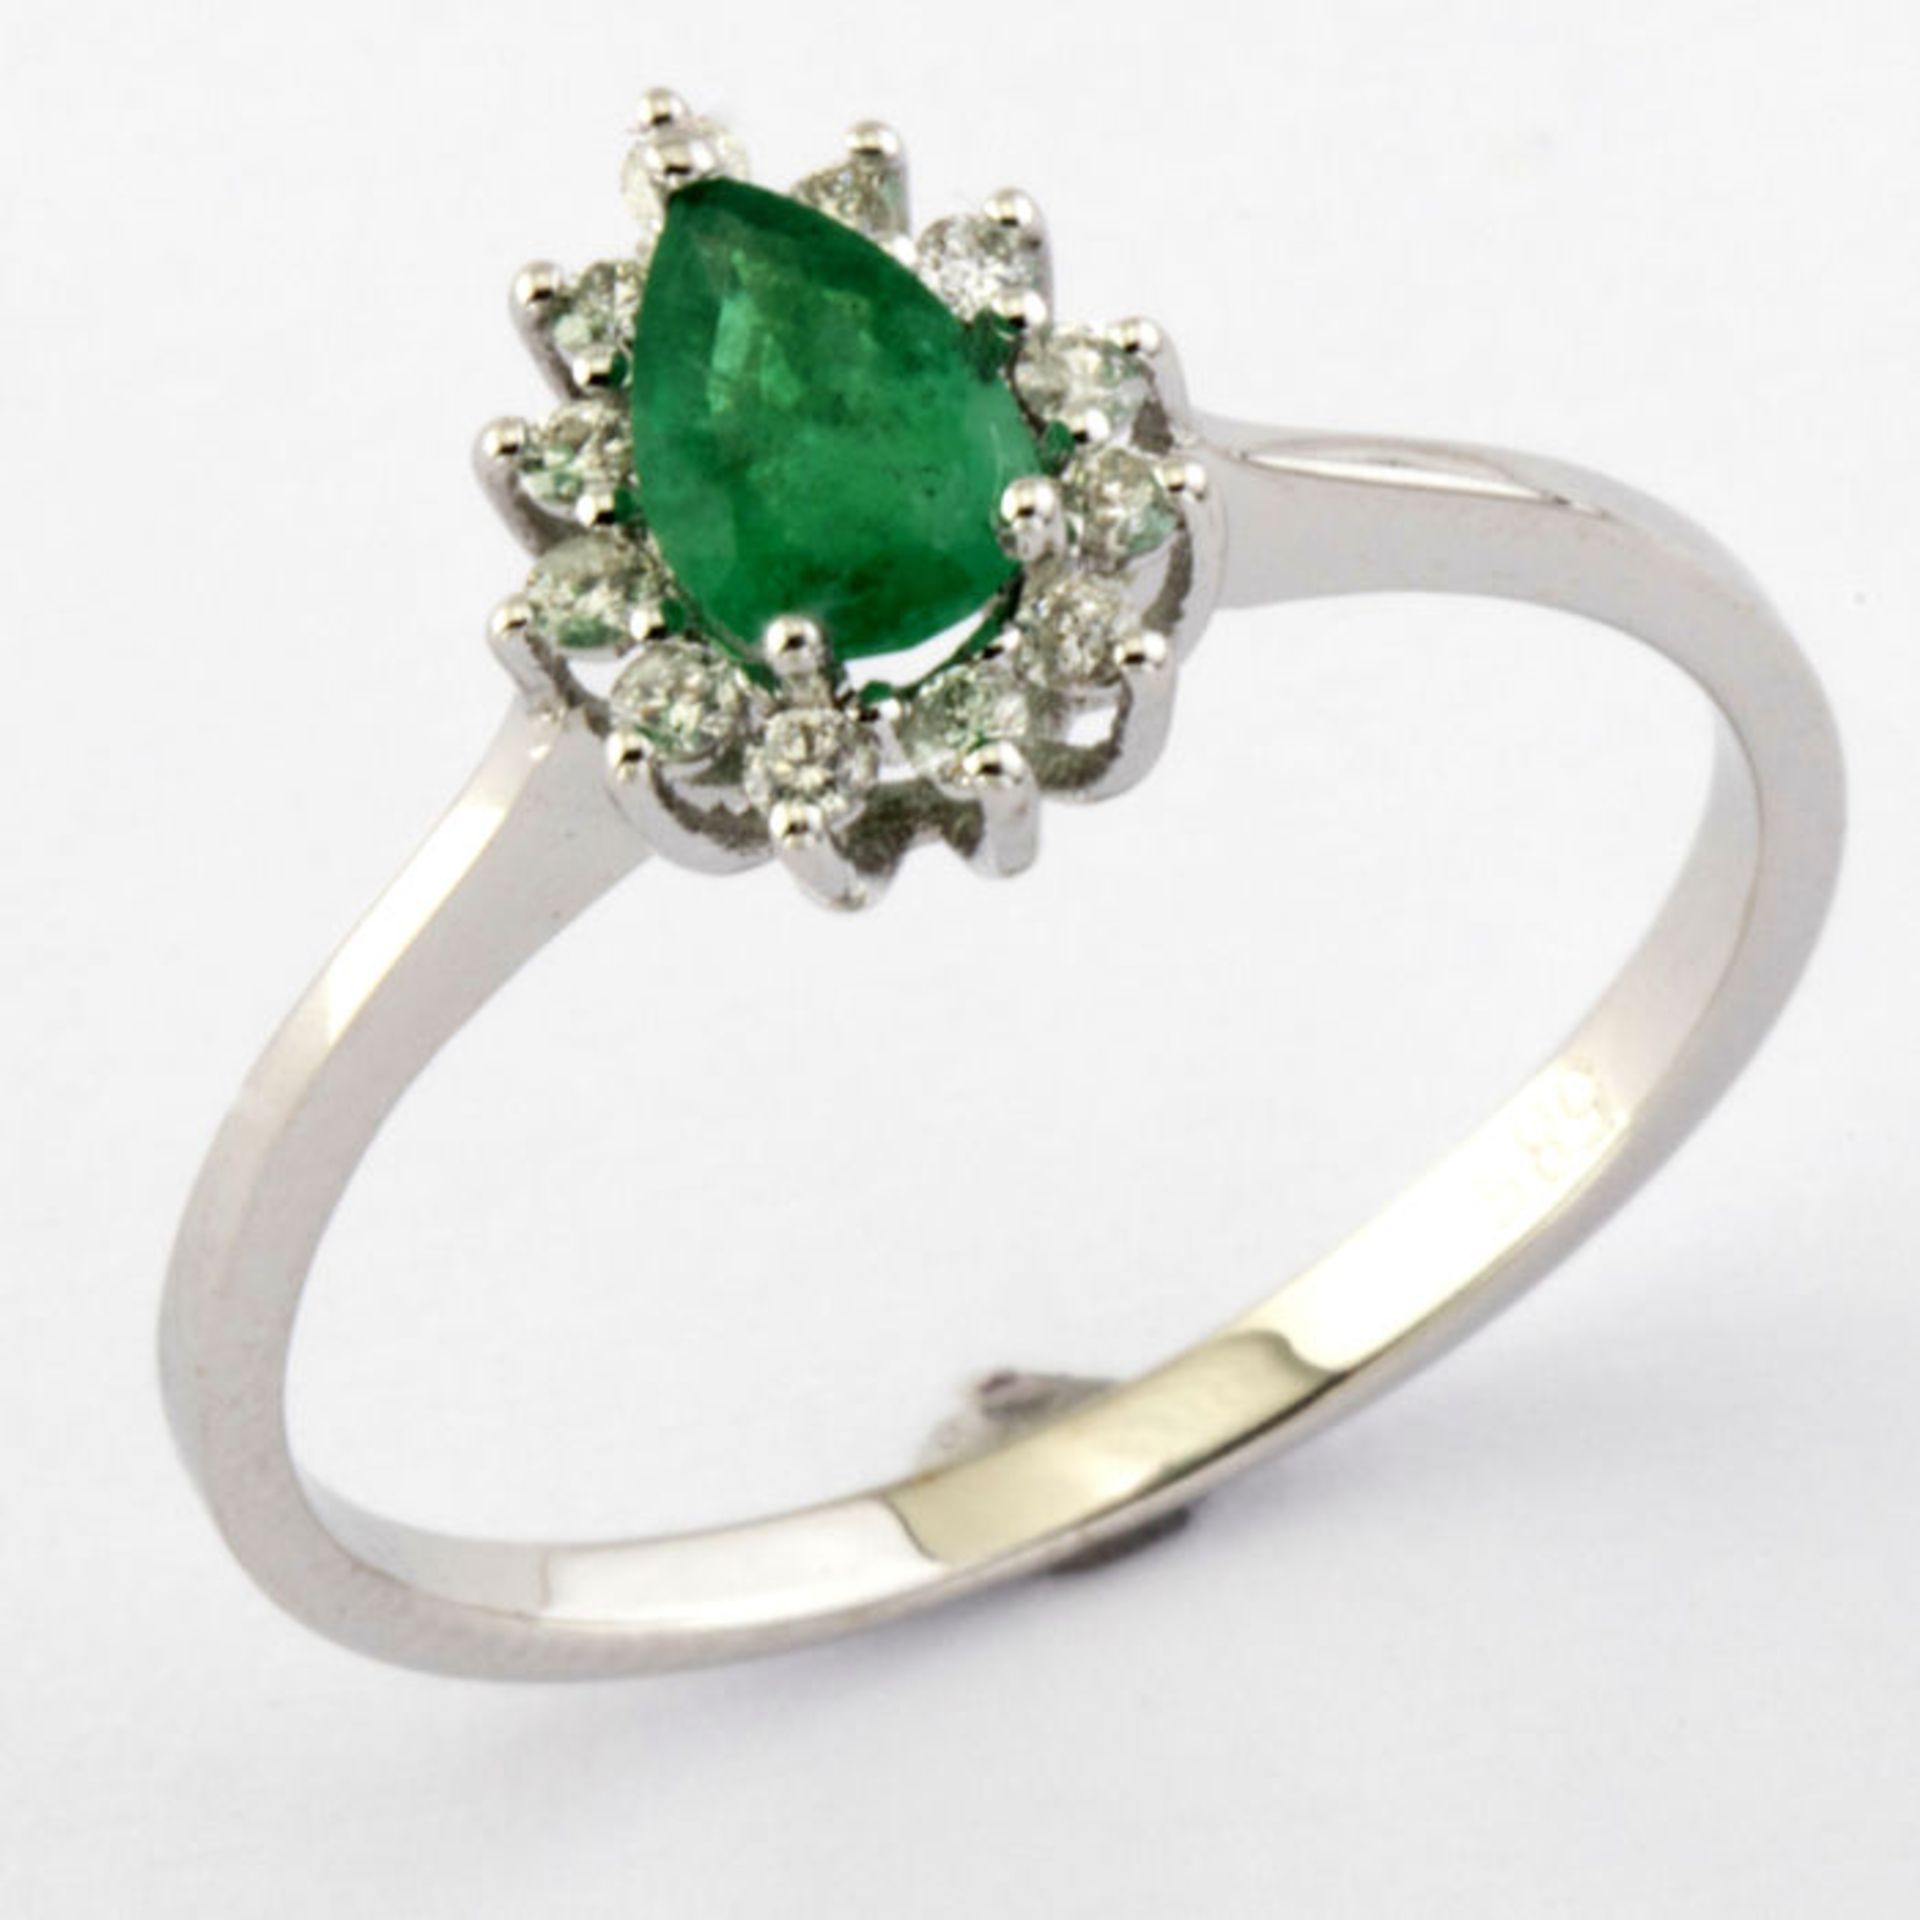 14K White Gold Cluster Ring set with natural Emerald and 12 Brilliant cut diamonds, 0,50ct in total